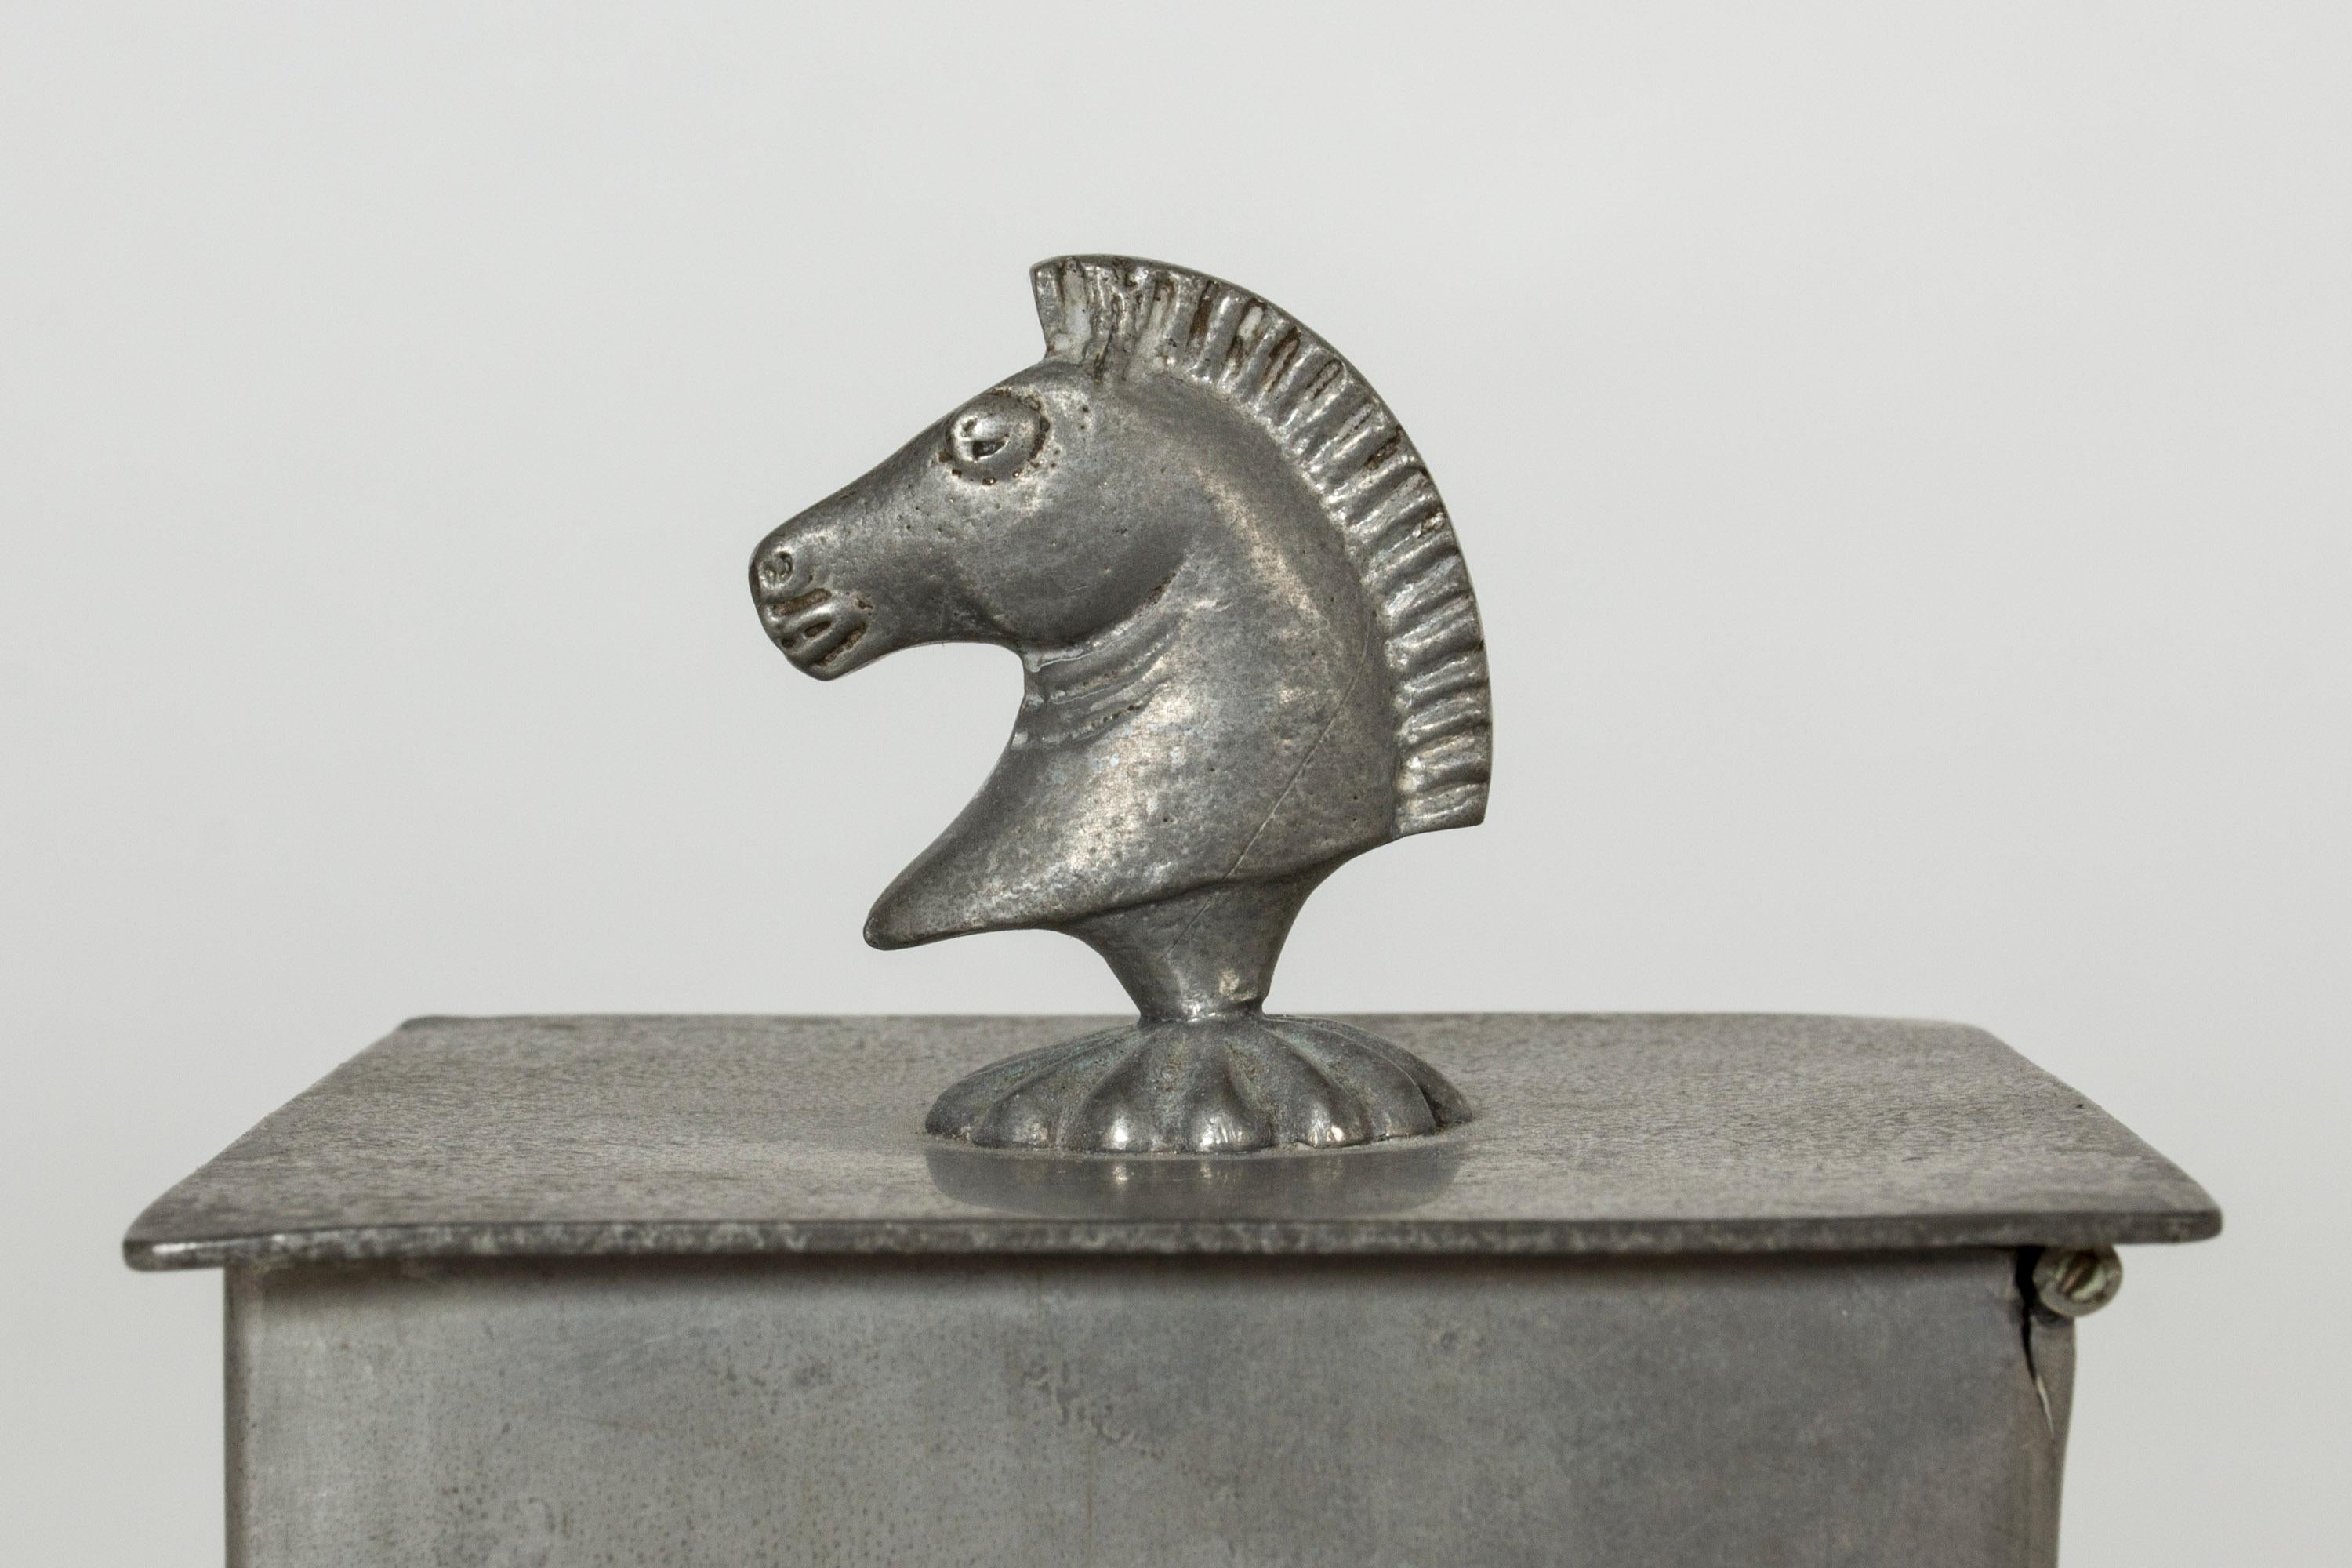 Swedish Pewter Jar from 1927 by Harald Linder